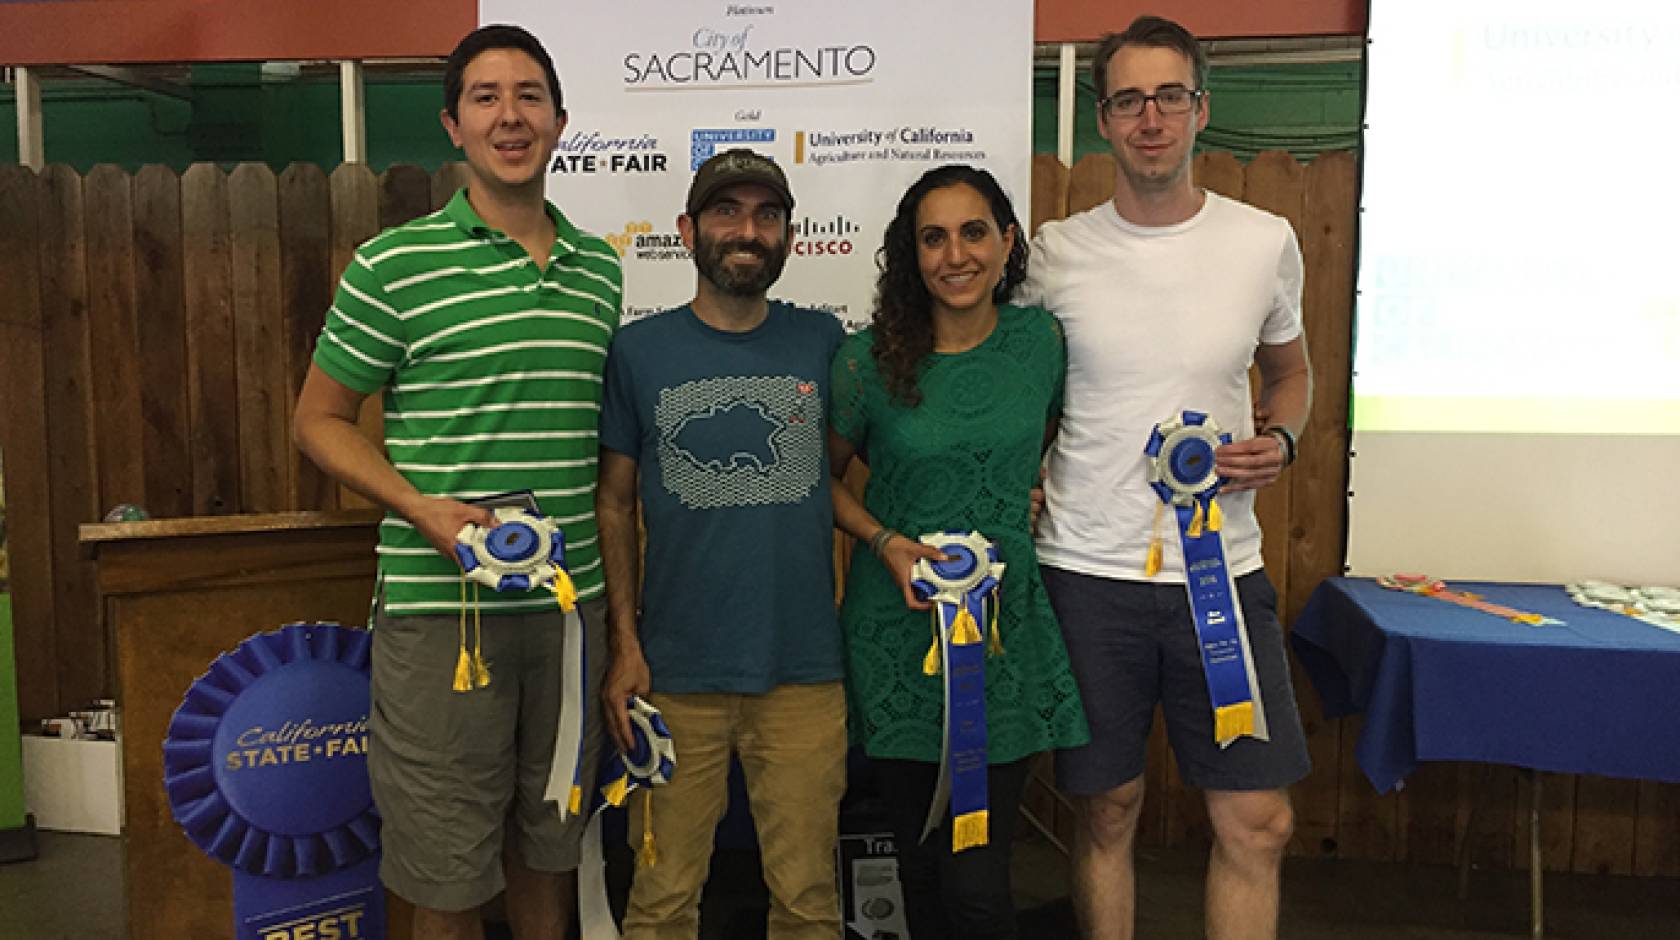 Members of the first place team in the Apps for Ag hackathon, GivingGarden, (from left) Scott Kirkland, Josh Livni, Deema Tamimi and John Knoll.